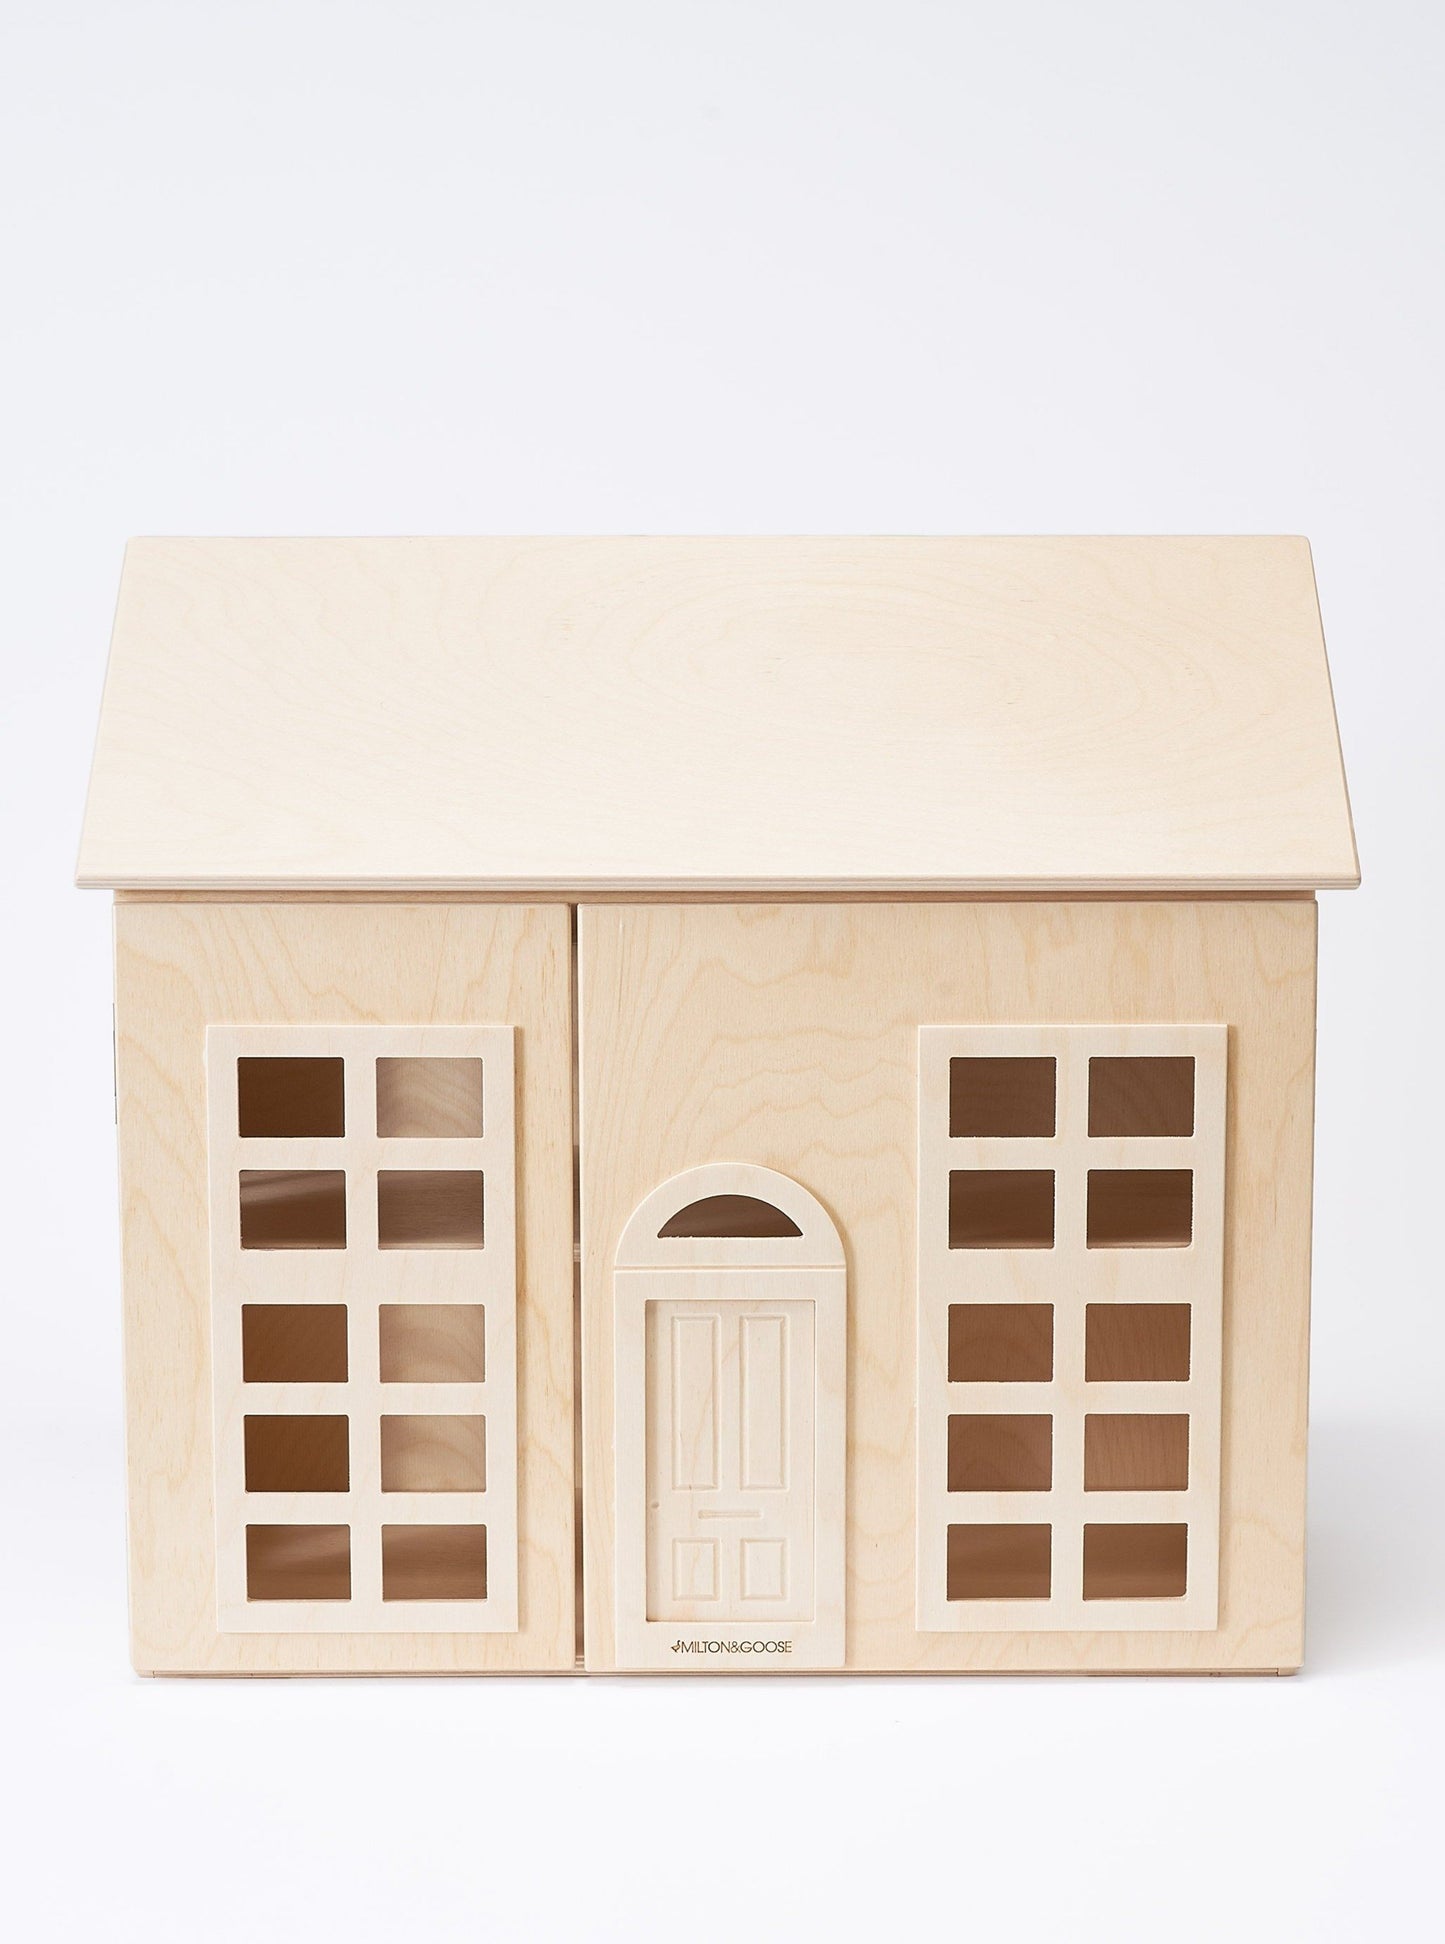 Hudson dollhouse by Milton and Goose